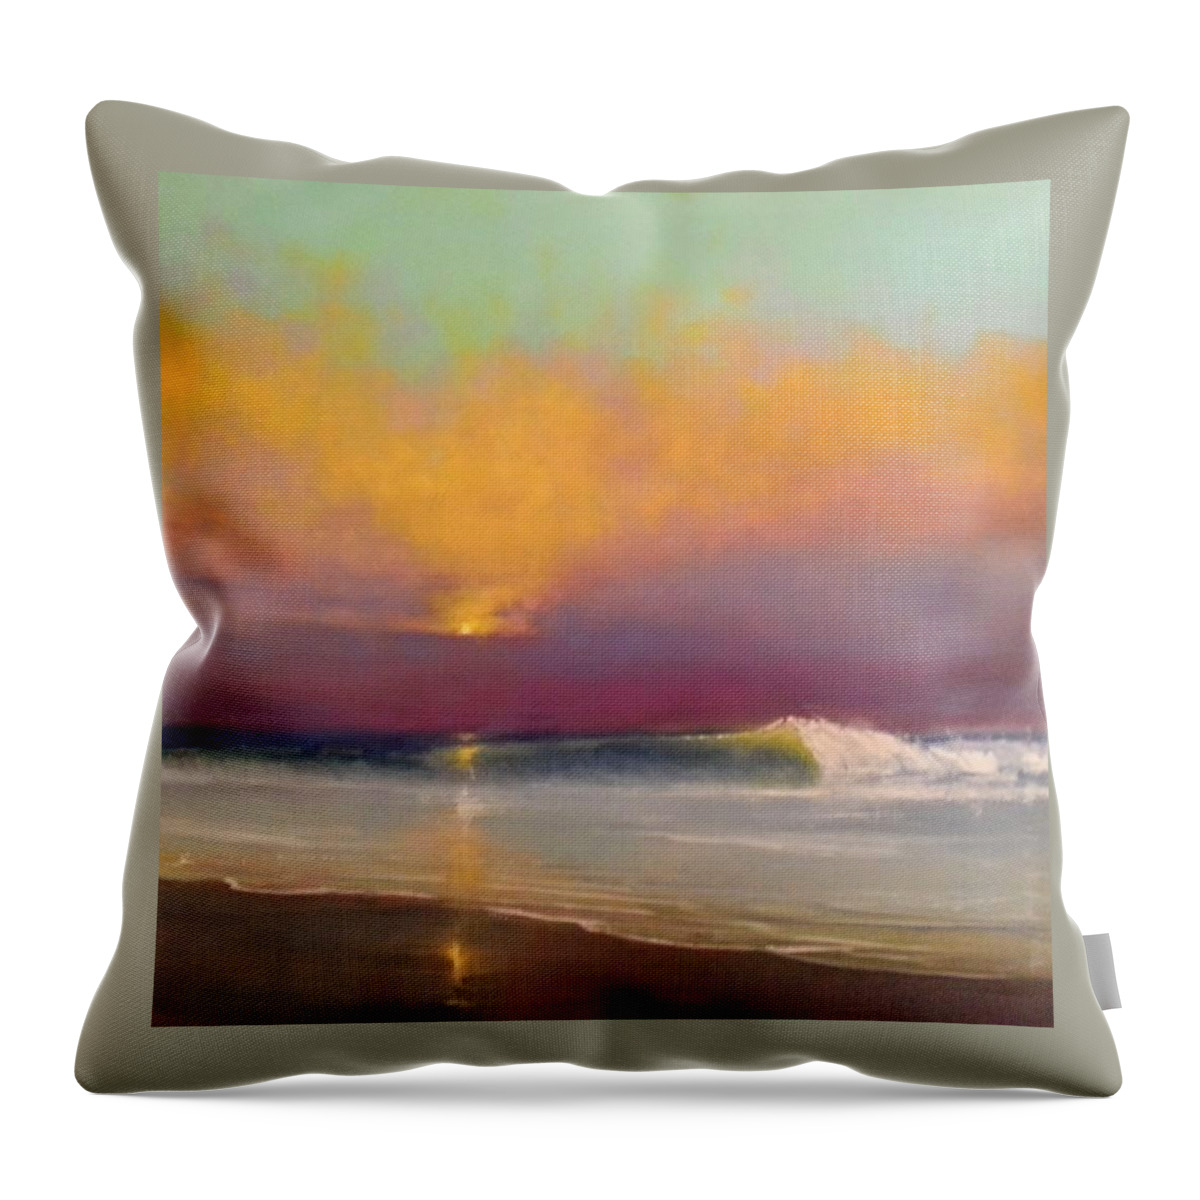  Throw Pillow featuring the painting Lone Breaker by Jessica Anne Thomas